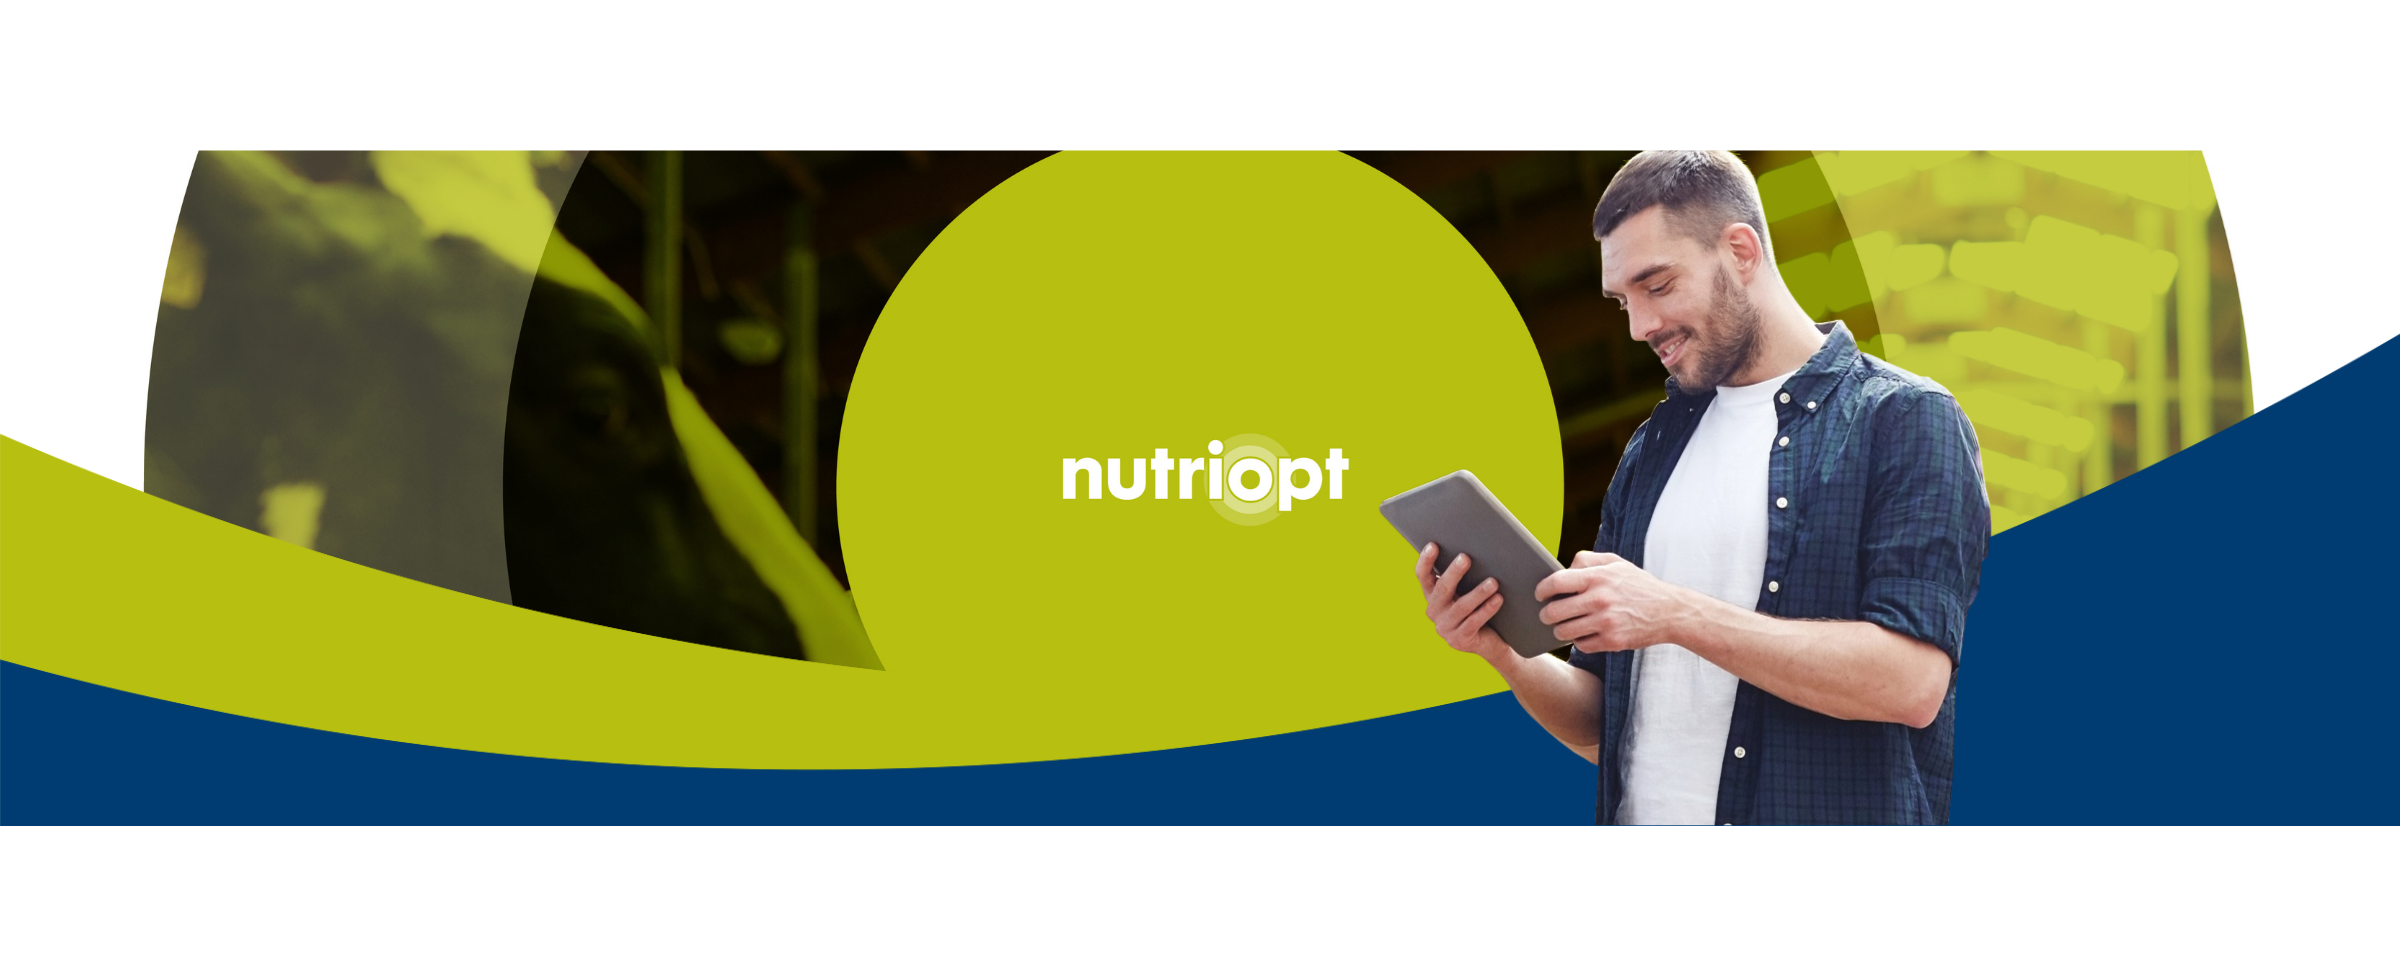 Welcome to NutriOpt